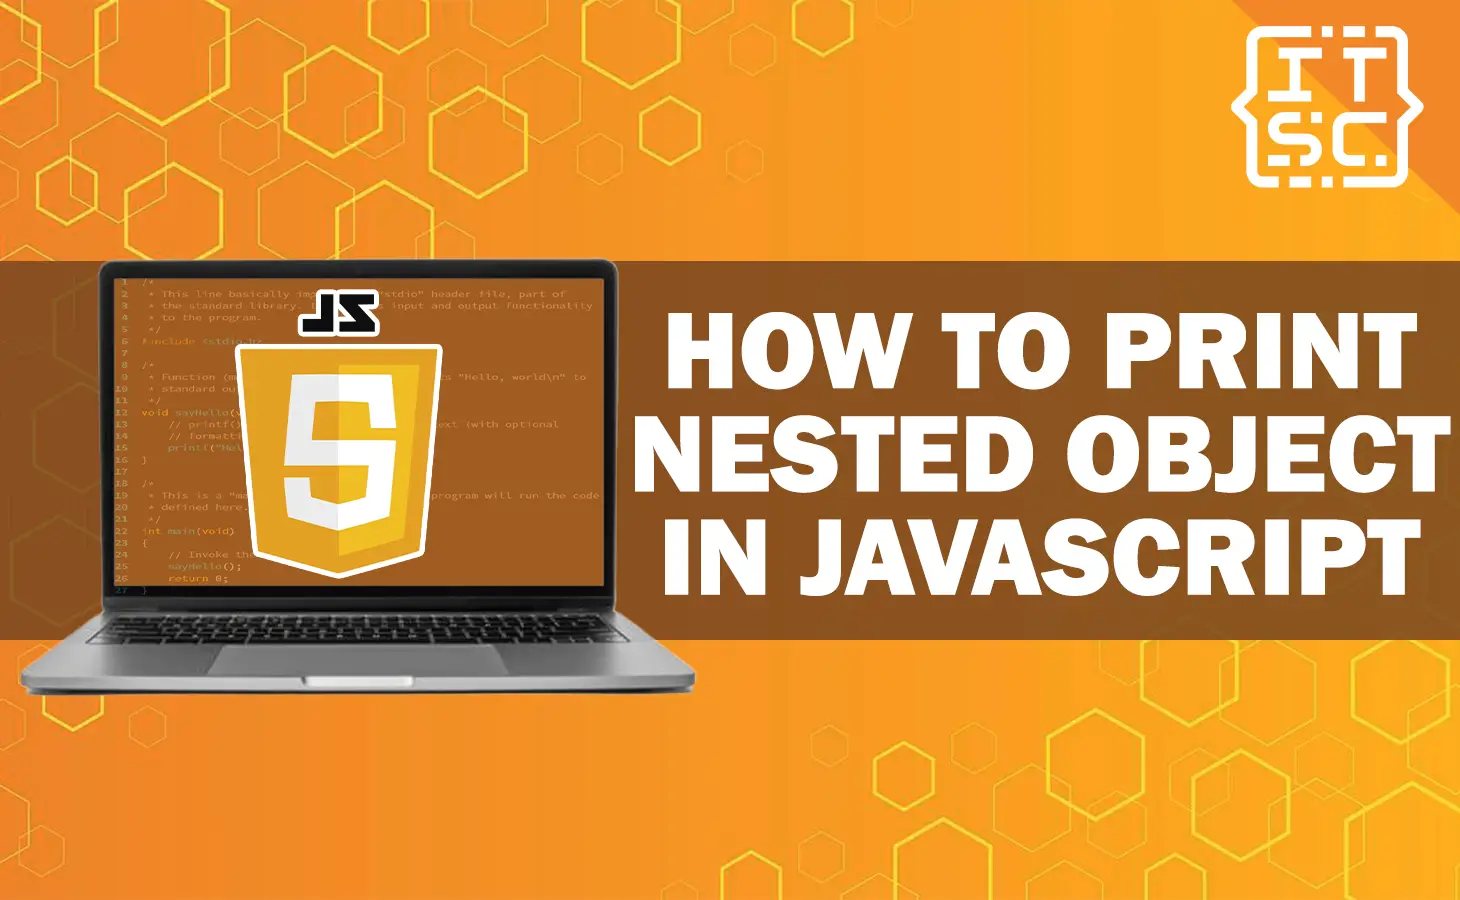 How to print nested object in JavaScript